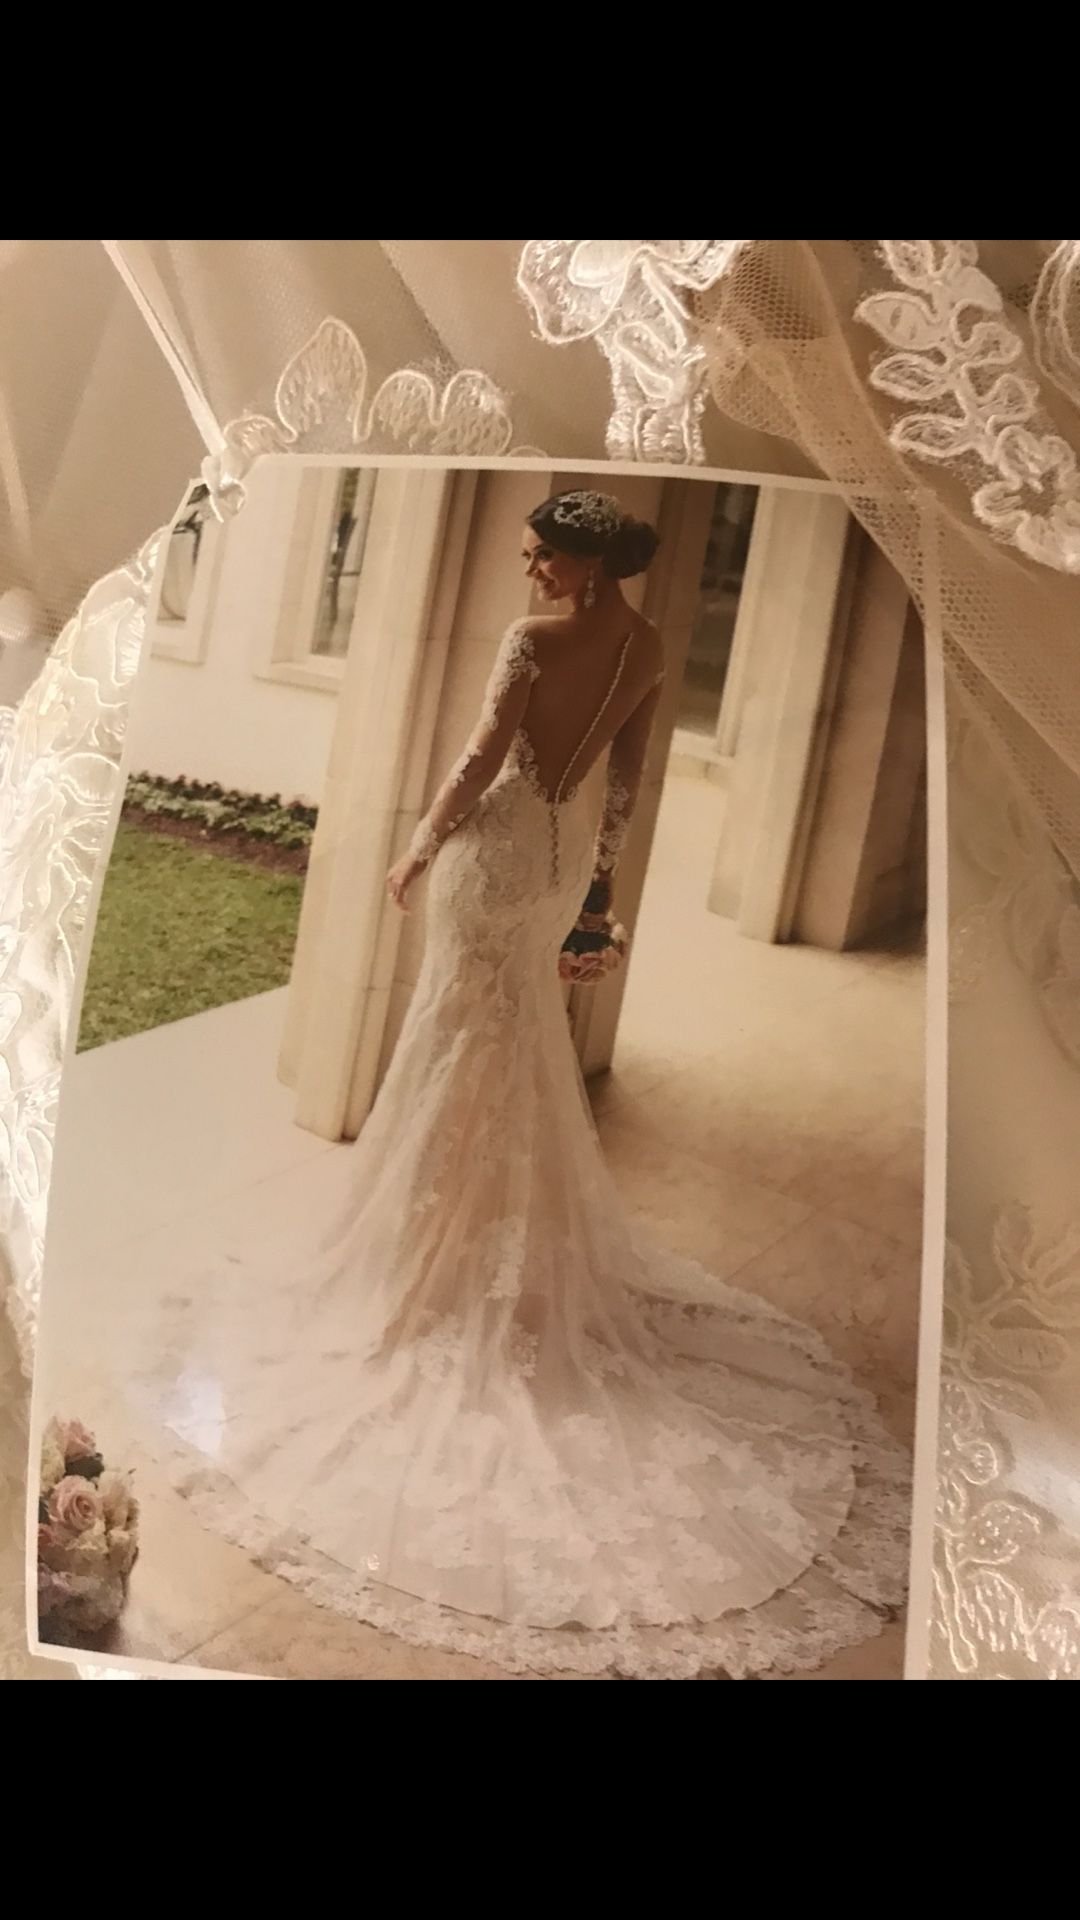 Lace Bridal Dress (Veil Included) 